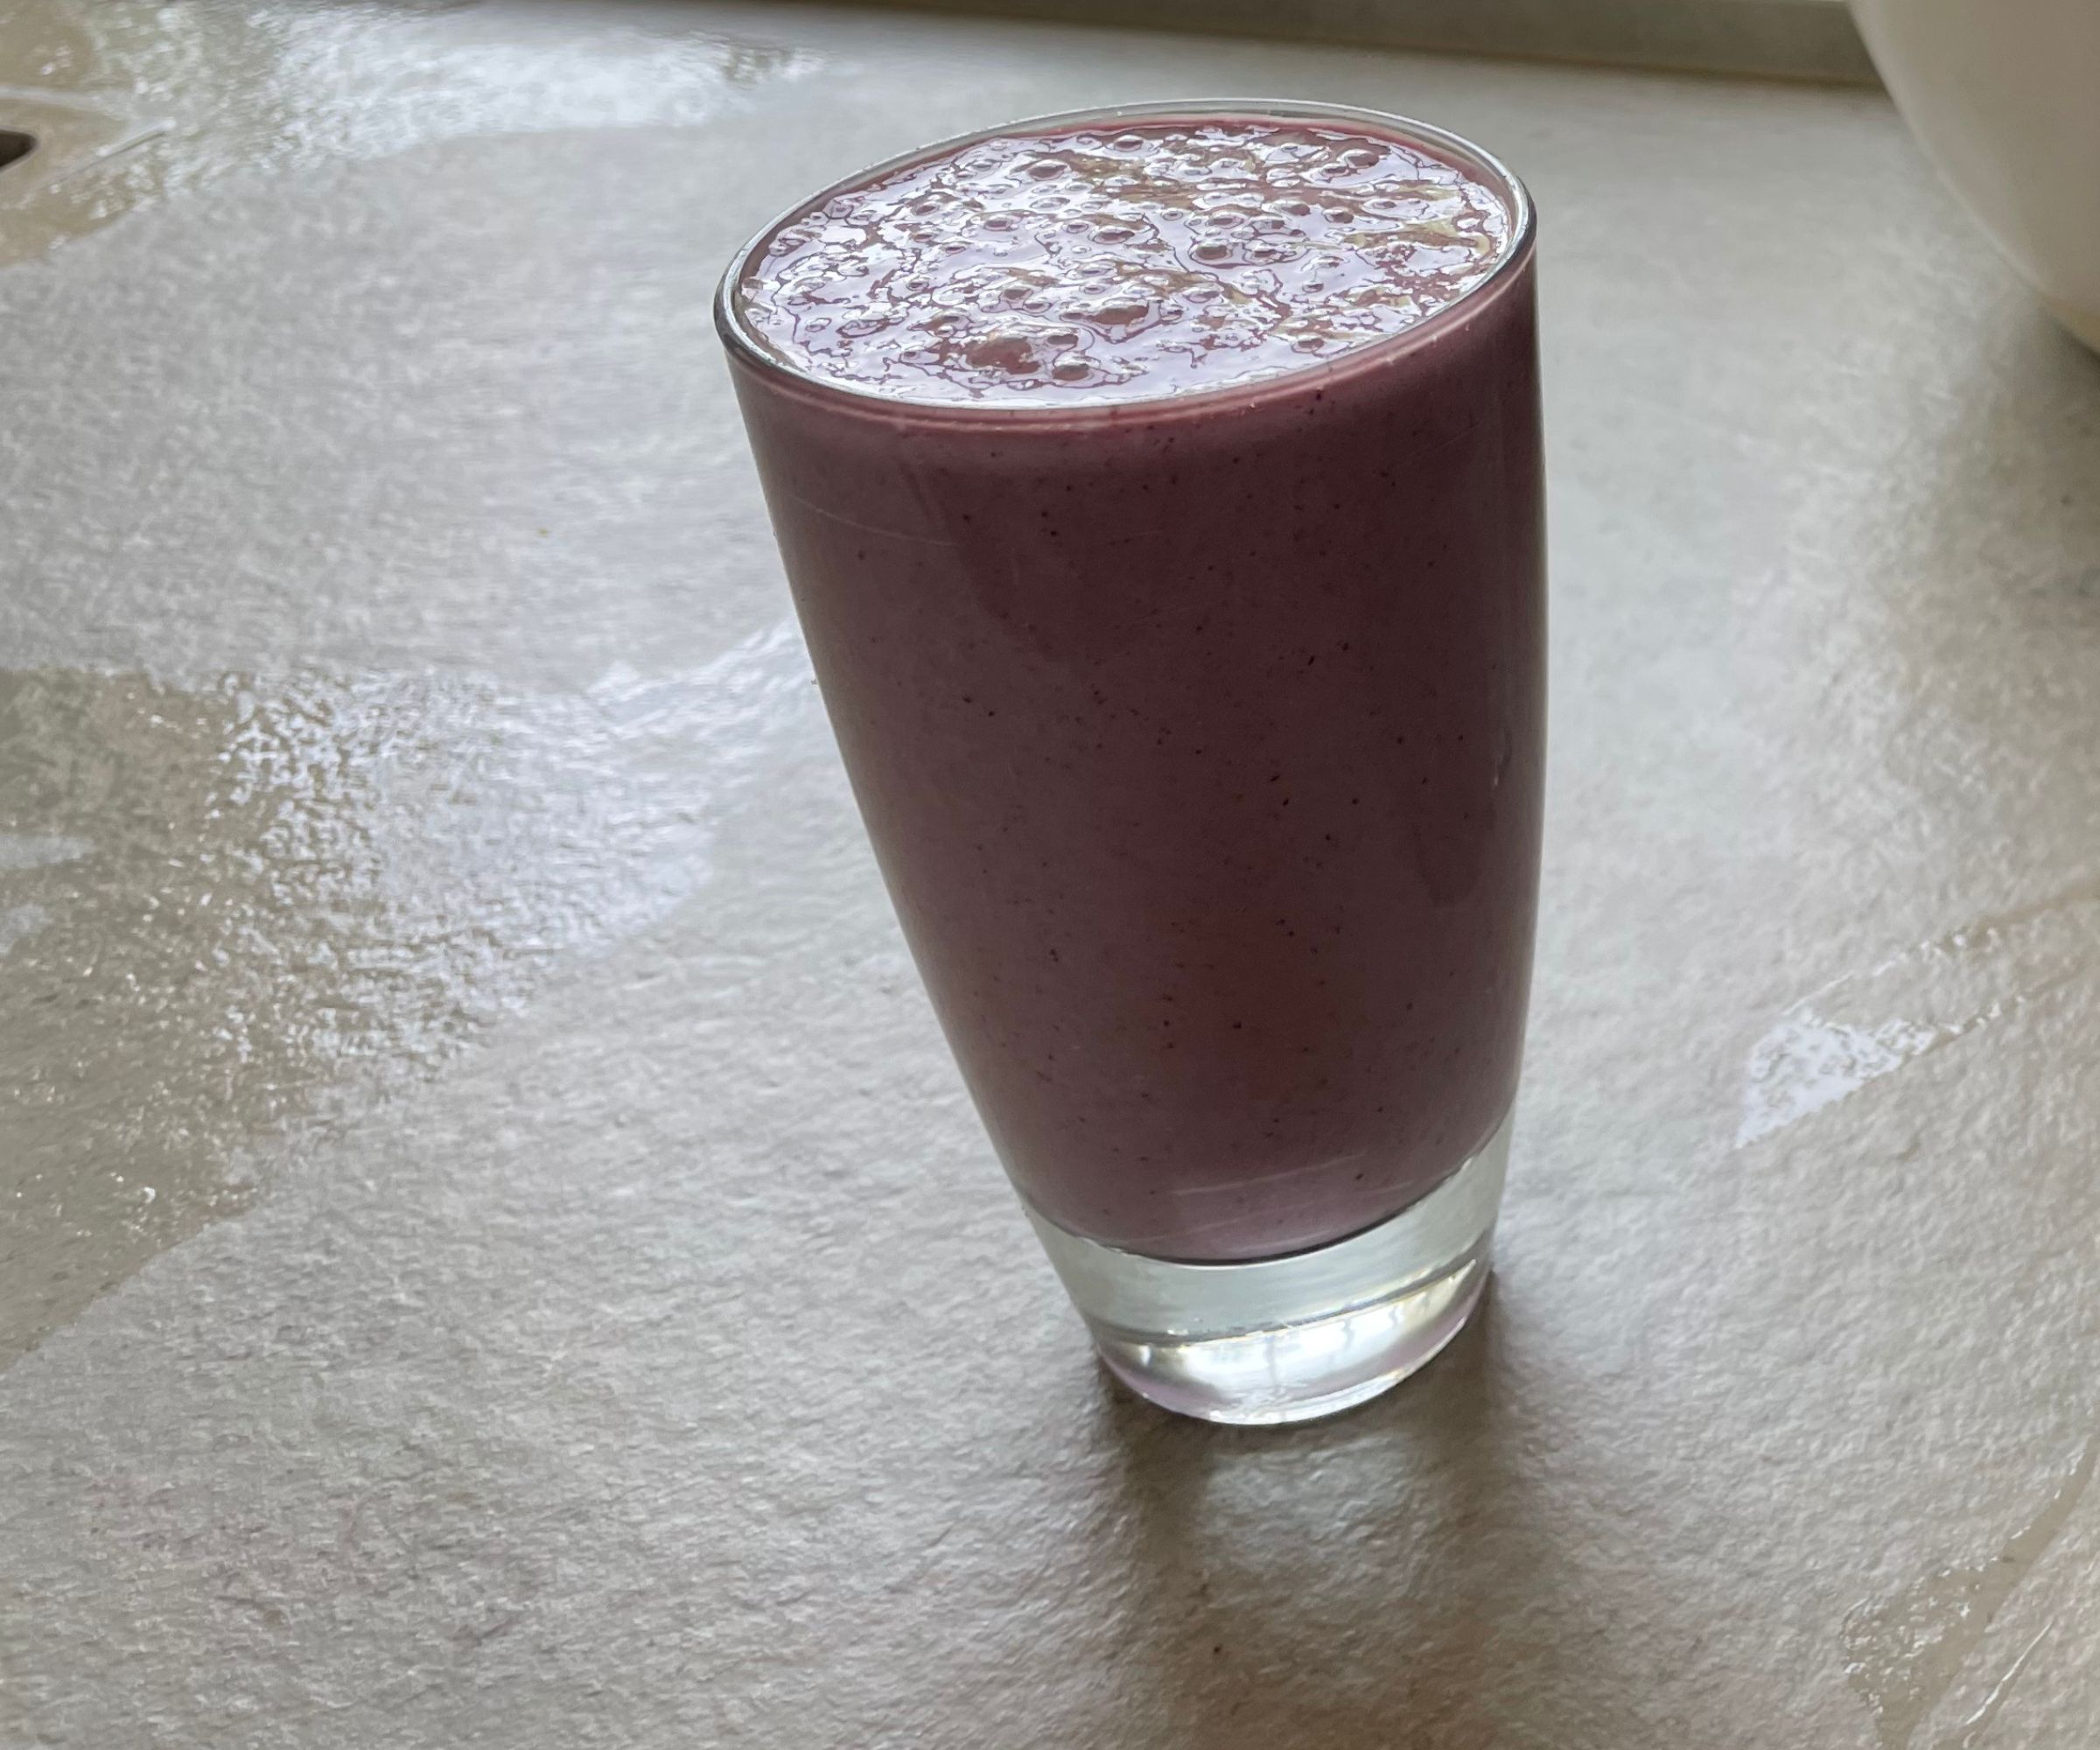 Smoothie made in the Bamix immersion blender